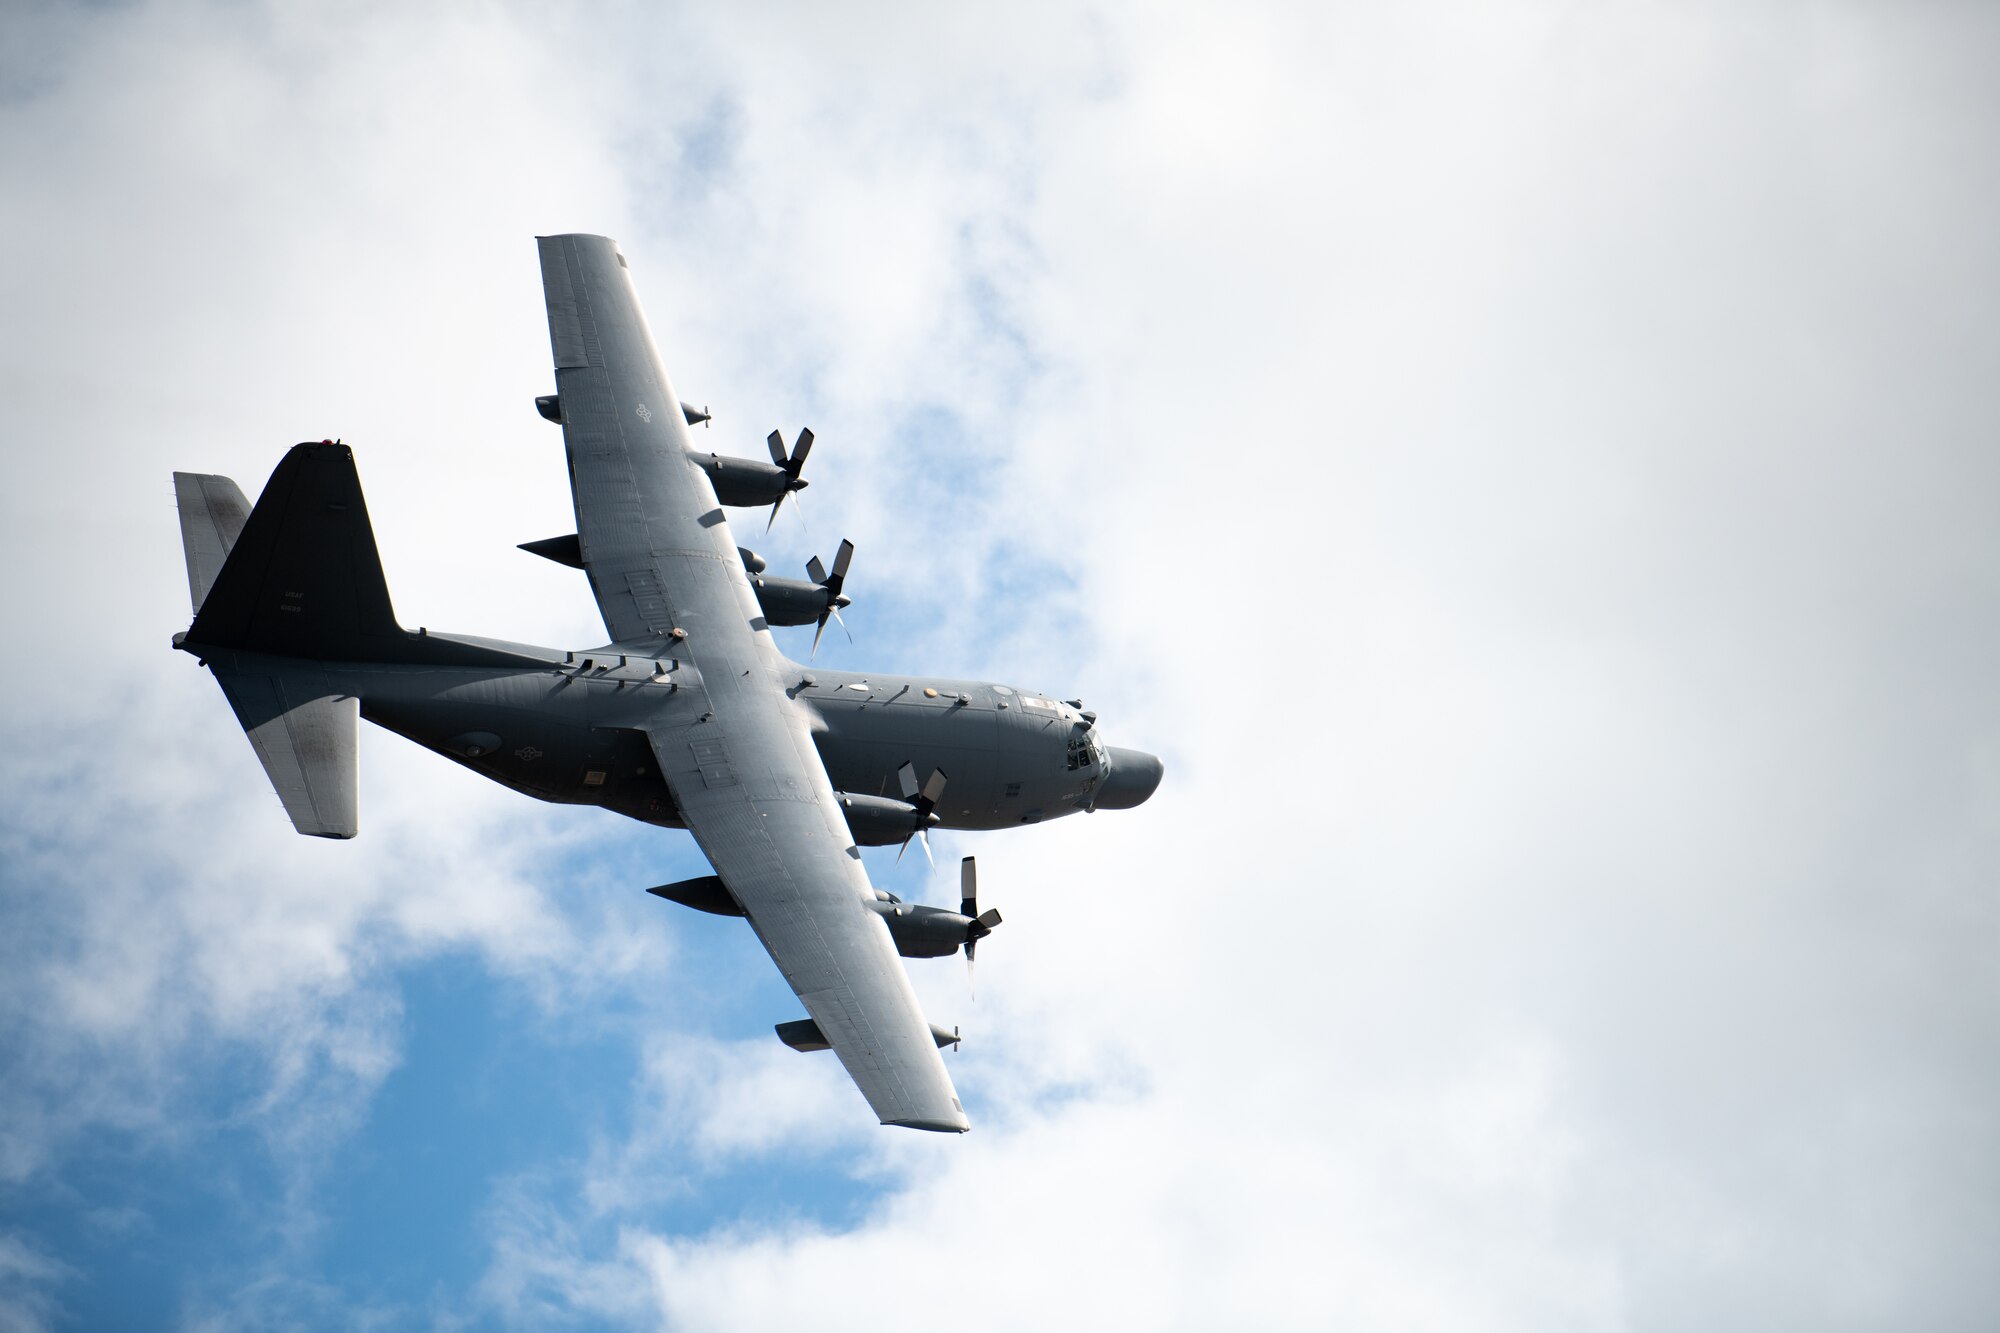 An MC-130H Combat Talon II Aircraft flies over the Hurlburt Field, Florida flightline as they return from a deployment Oct. 6, 2021. Two MC-130H Combat Talon II aircraft crews returned from a deployment to see their families waiting on the flightline. (U.S. Air Force photo by Staff Sgt. Rito Smith)